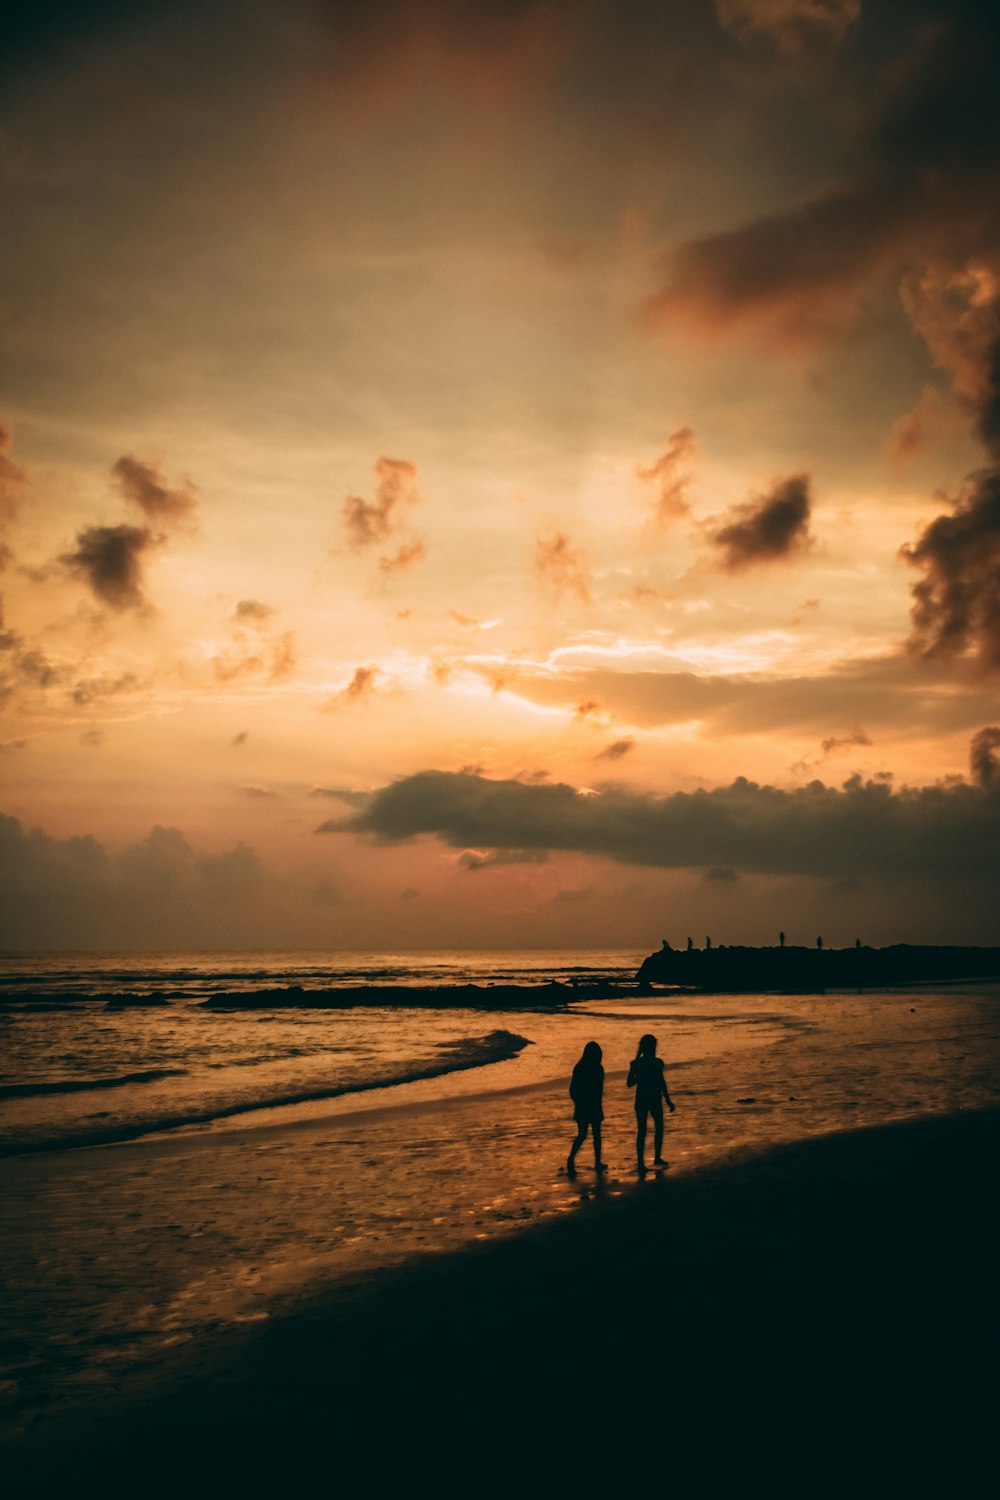 silhouette of 2 people walking on beach during sunset